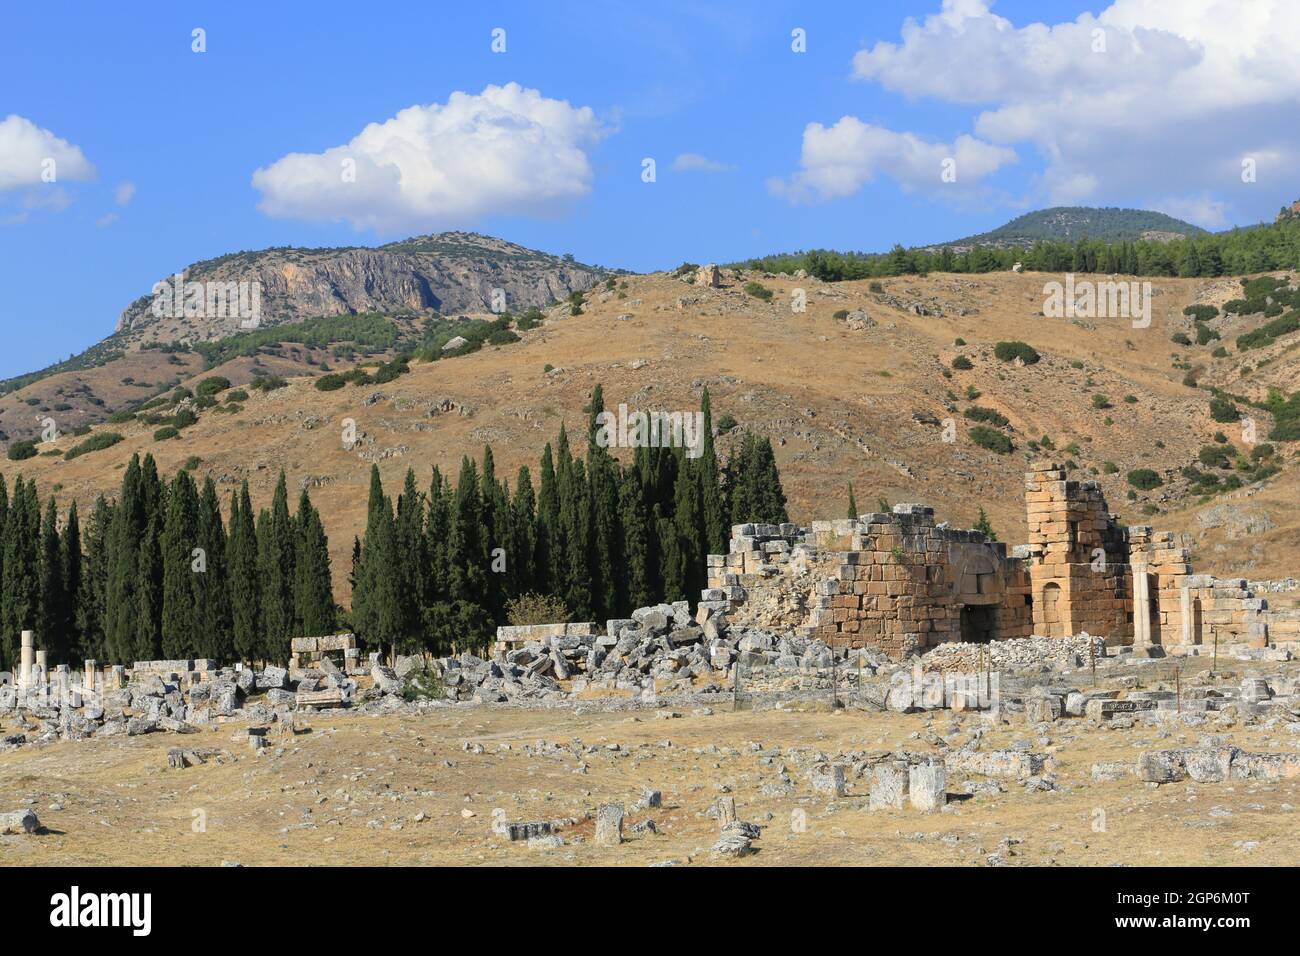 The Roman baths at the ancient spa city of Hierapolis dates from 190 BC and are near the travertine terraces of Pamukkale in Western Turkey. Stock Photo